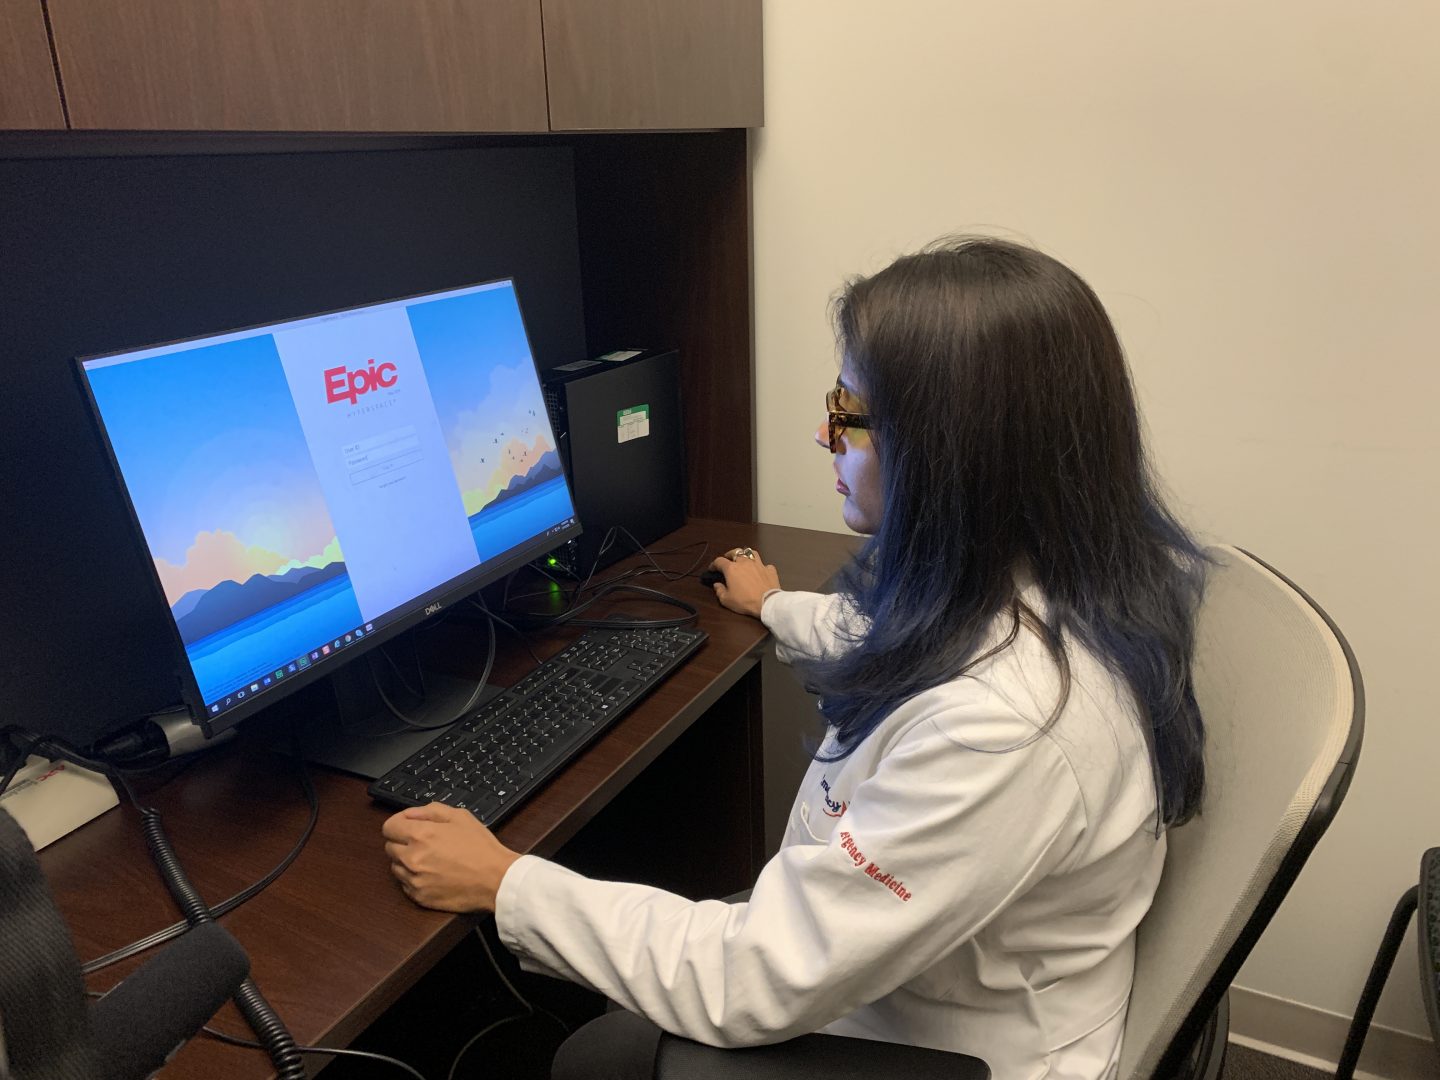 Dr. Aditi Joshi, director of JeffConnect, Thomas Jefferson University Hospital’s telehealth platform, opens EPIC, the hospital's electronic medical records program. That way she can look up at patient's history and see scans and other test results before meeting with them virtually.